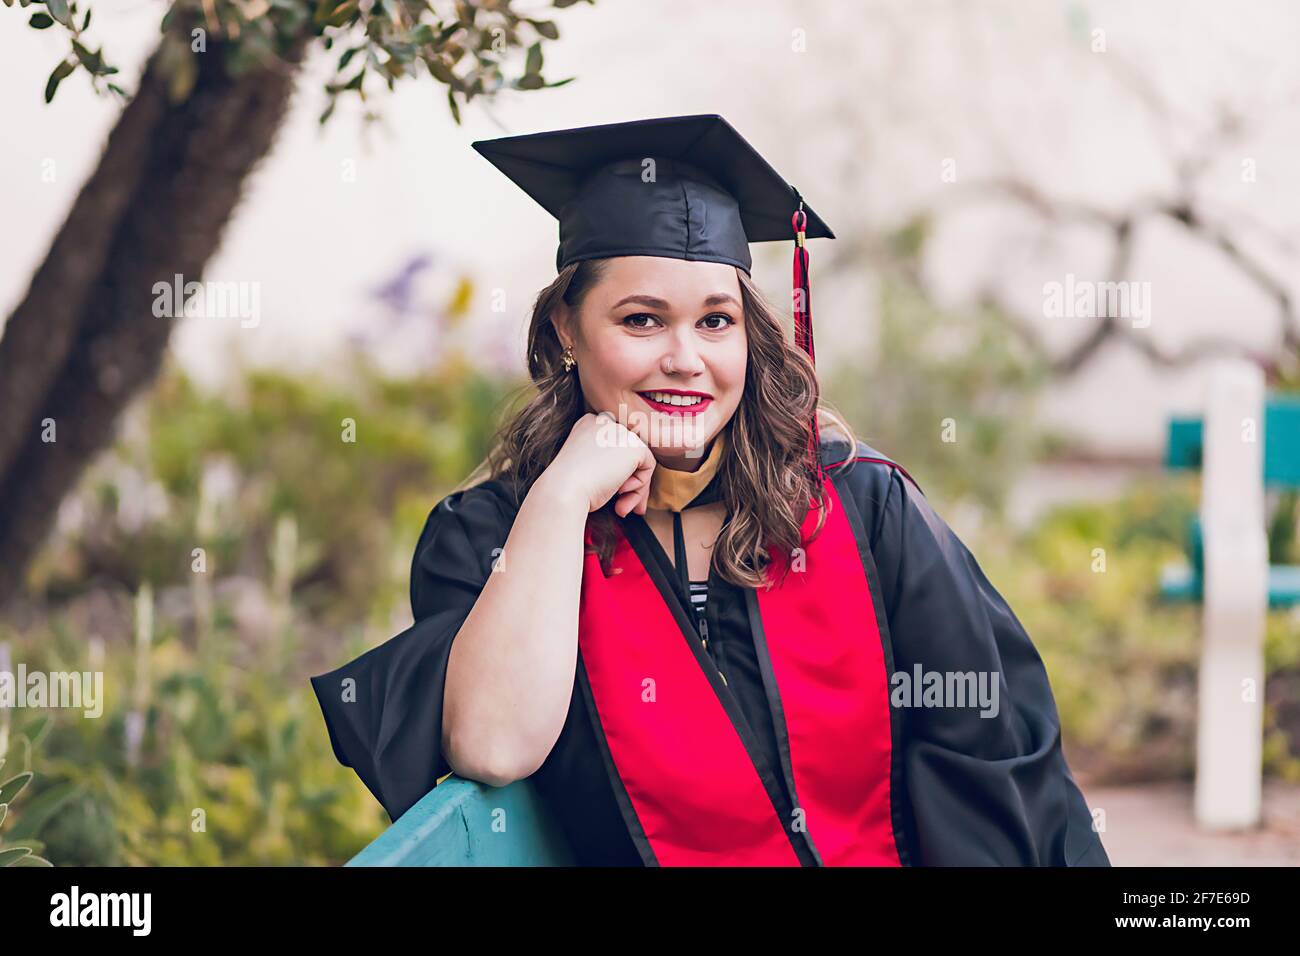 Young woman wearing a graduation gown/cap Stock Photo - Alamy